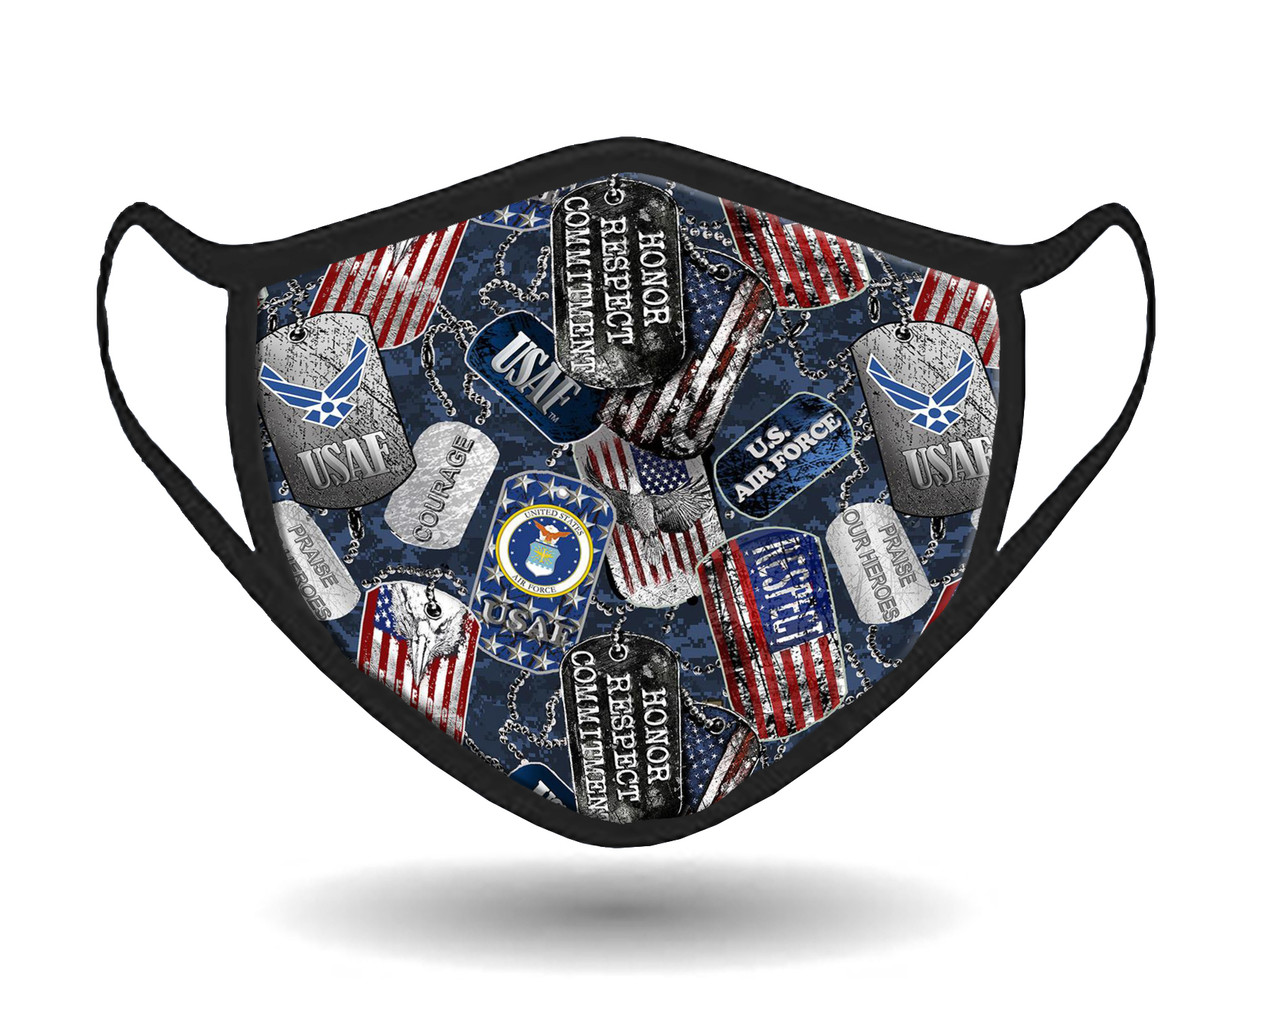 United States Air Force Face Mask with Anti-Microbial & Probiotics-100% Cotton-Individually Packaged-Adjustable Earloop